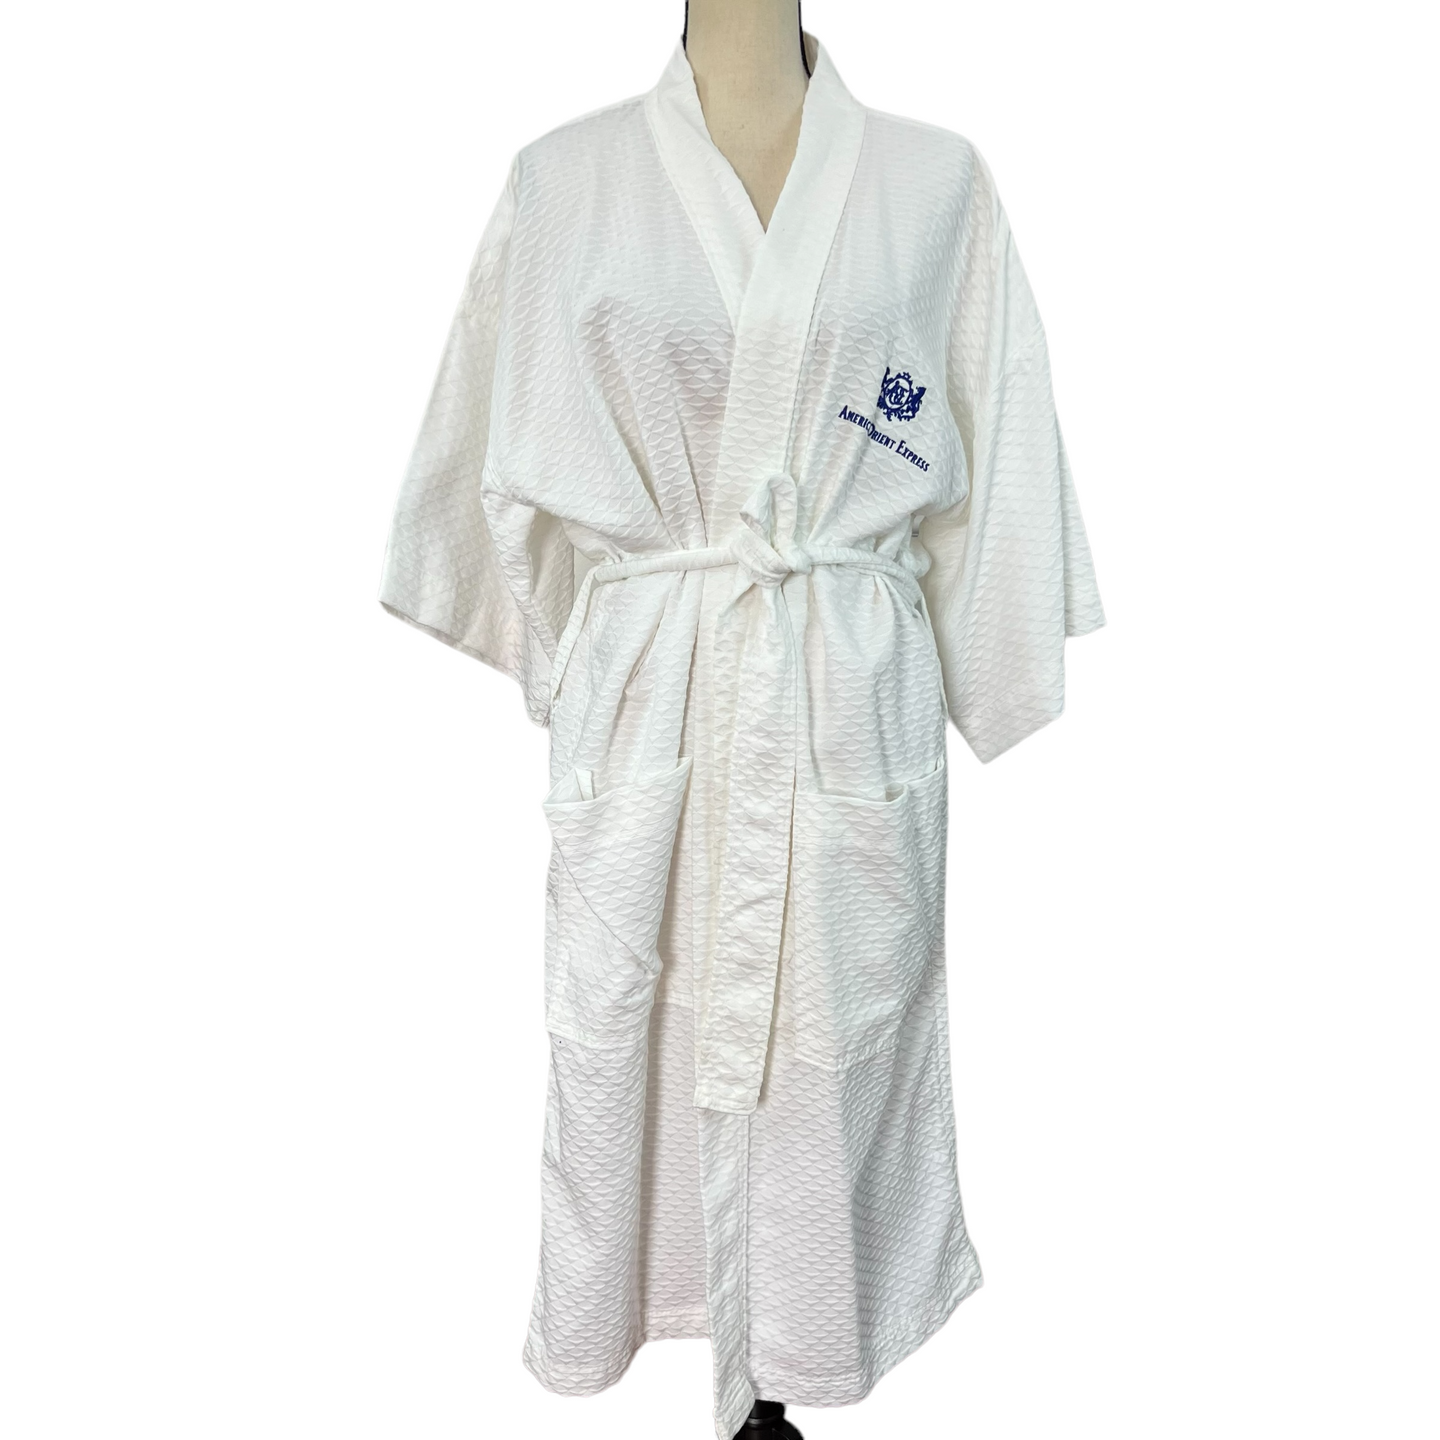 American Orient Express Train Embroidered Robe One Size by Bernard Robes